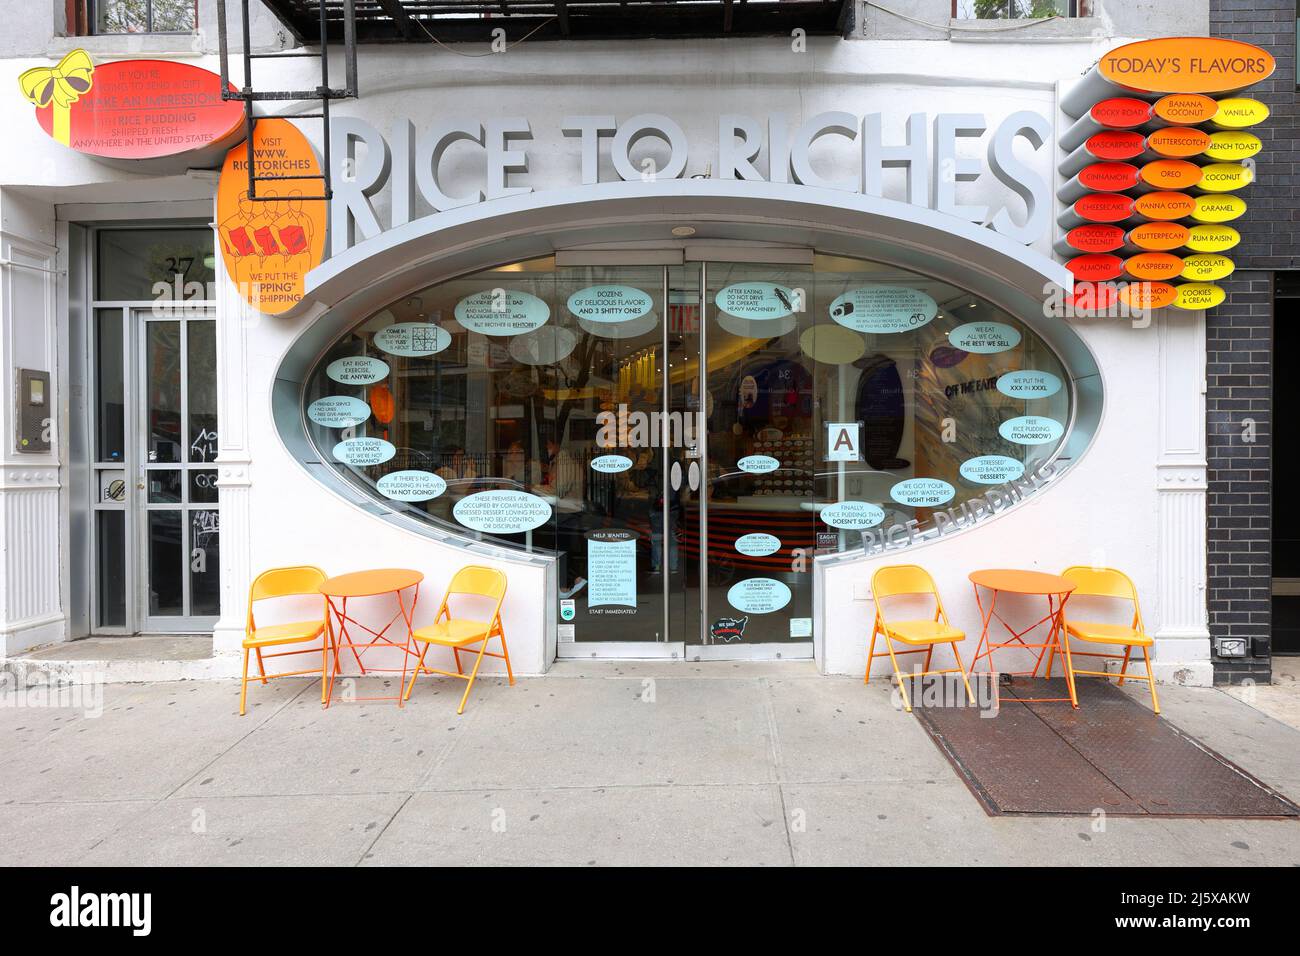 Rice To Riches, 37 Spring St, New York, NYC storefront photo of a rice pudding shop in the Little Italy, Nolita neighborhood in Manhattan. Stock Photo